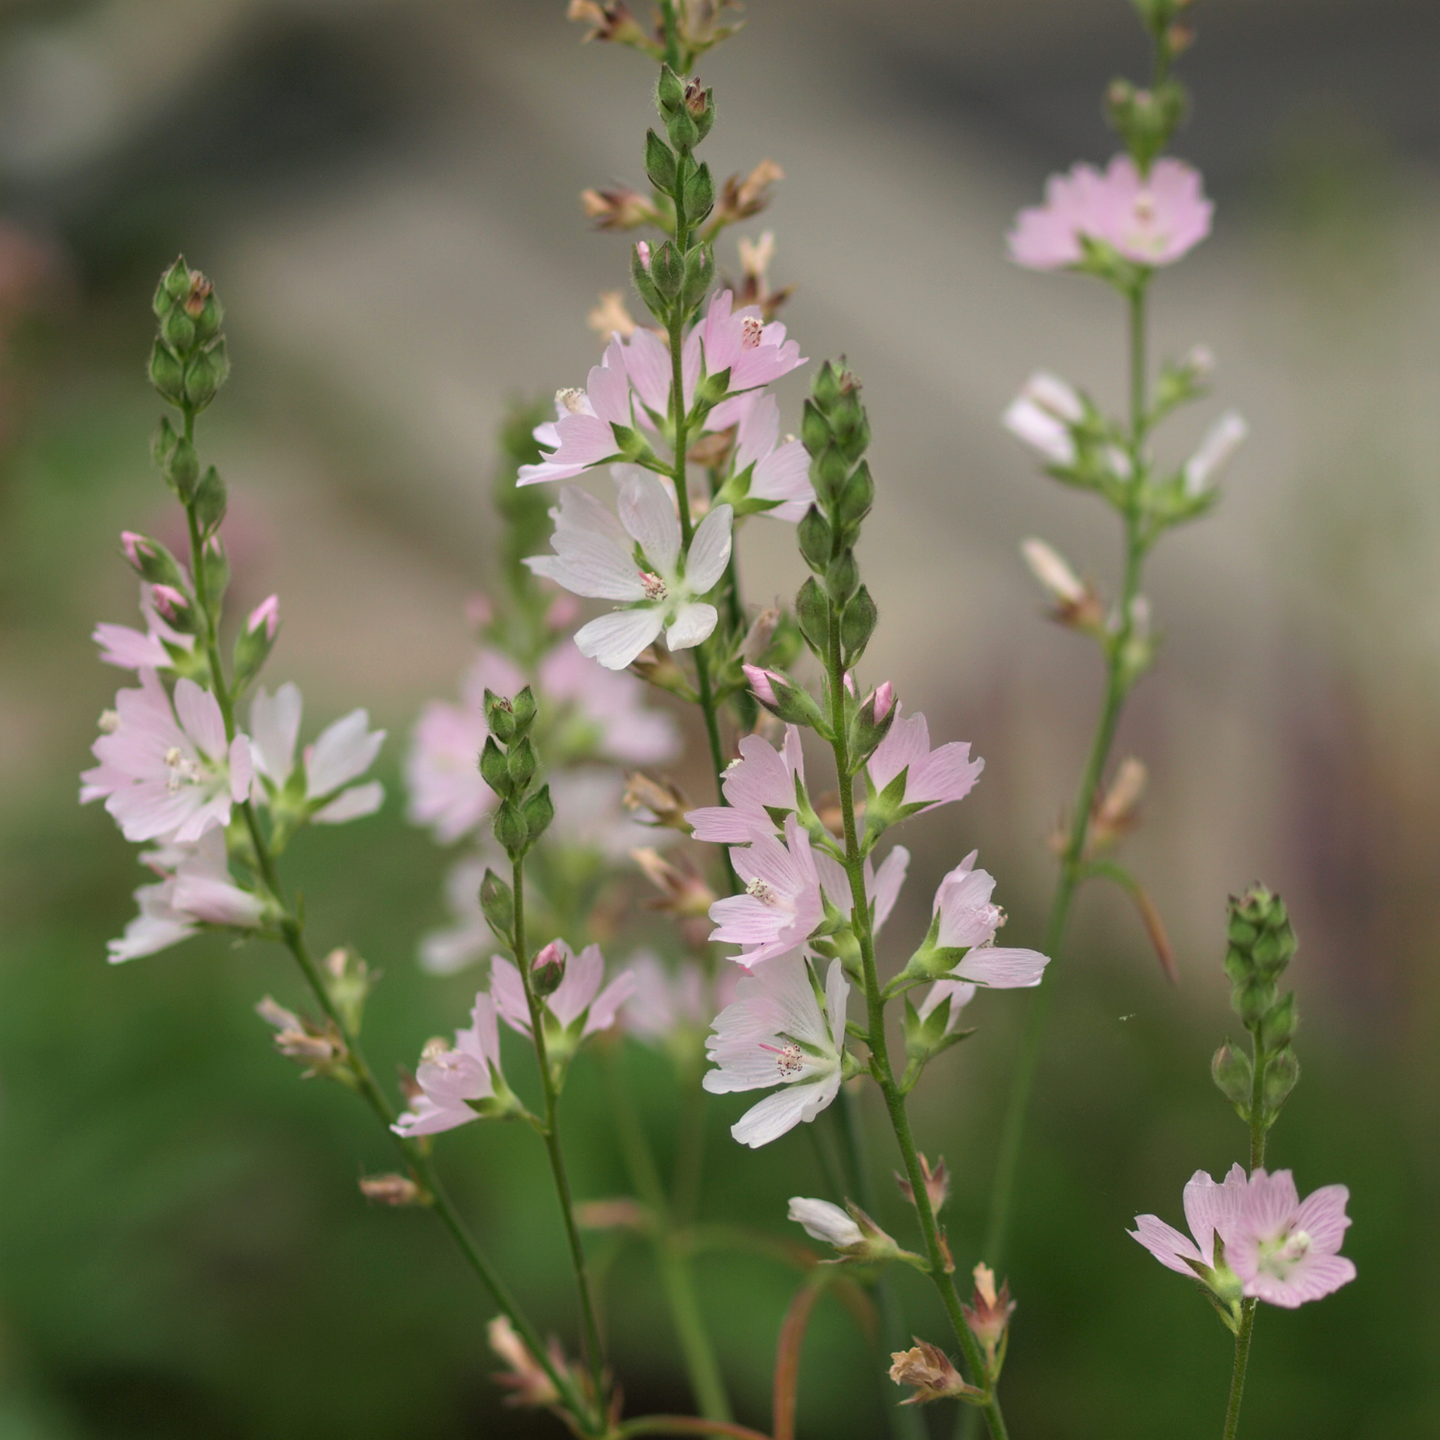 Meadow checkermallow flowers (Sidalcea campestris). One of 150+ species of Pacific Northwest native plants available at Sparrowhawk Native Plants, Native Plant Nursery in Portland, Oregon.